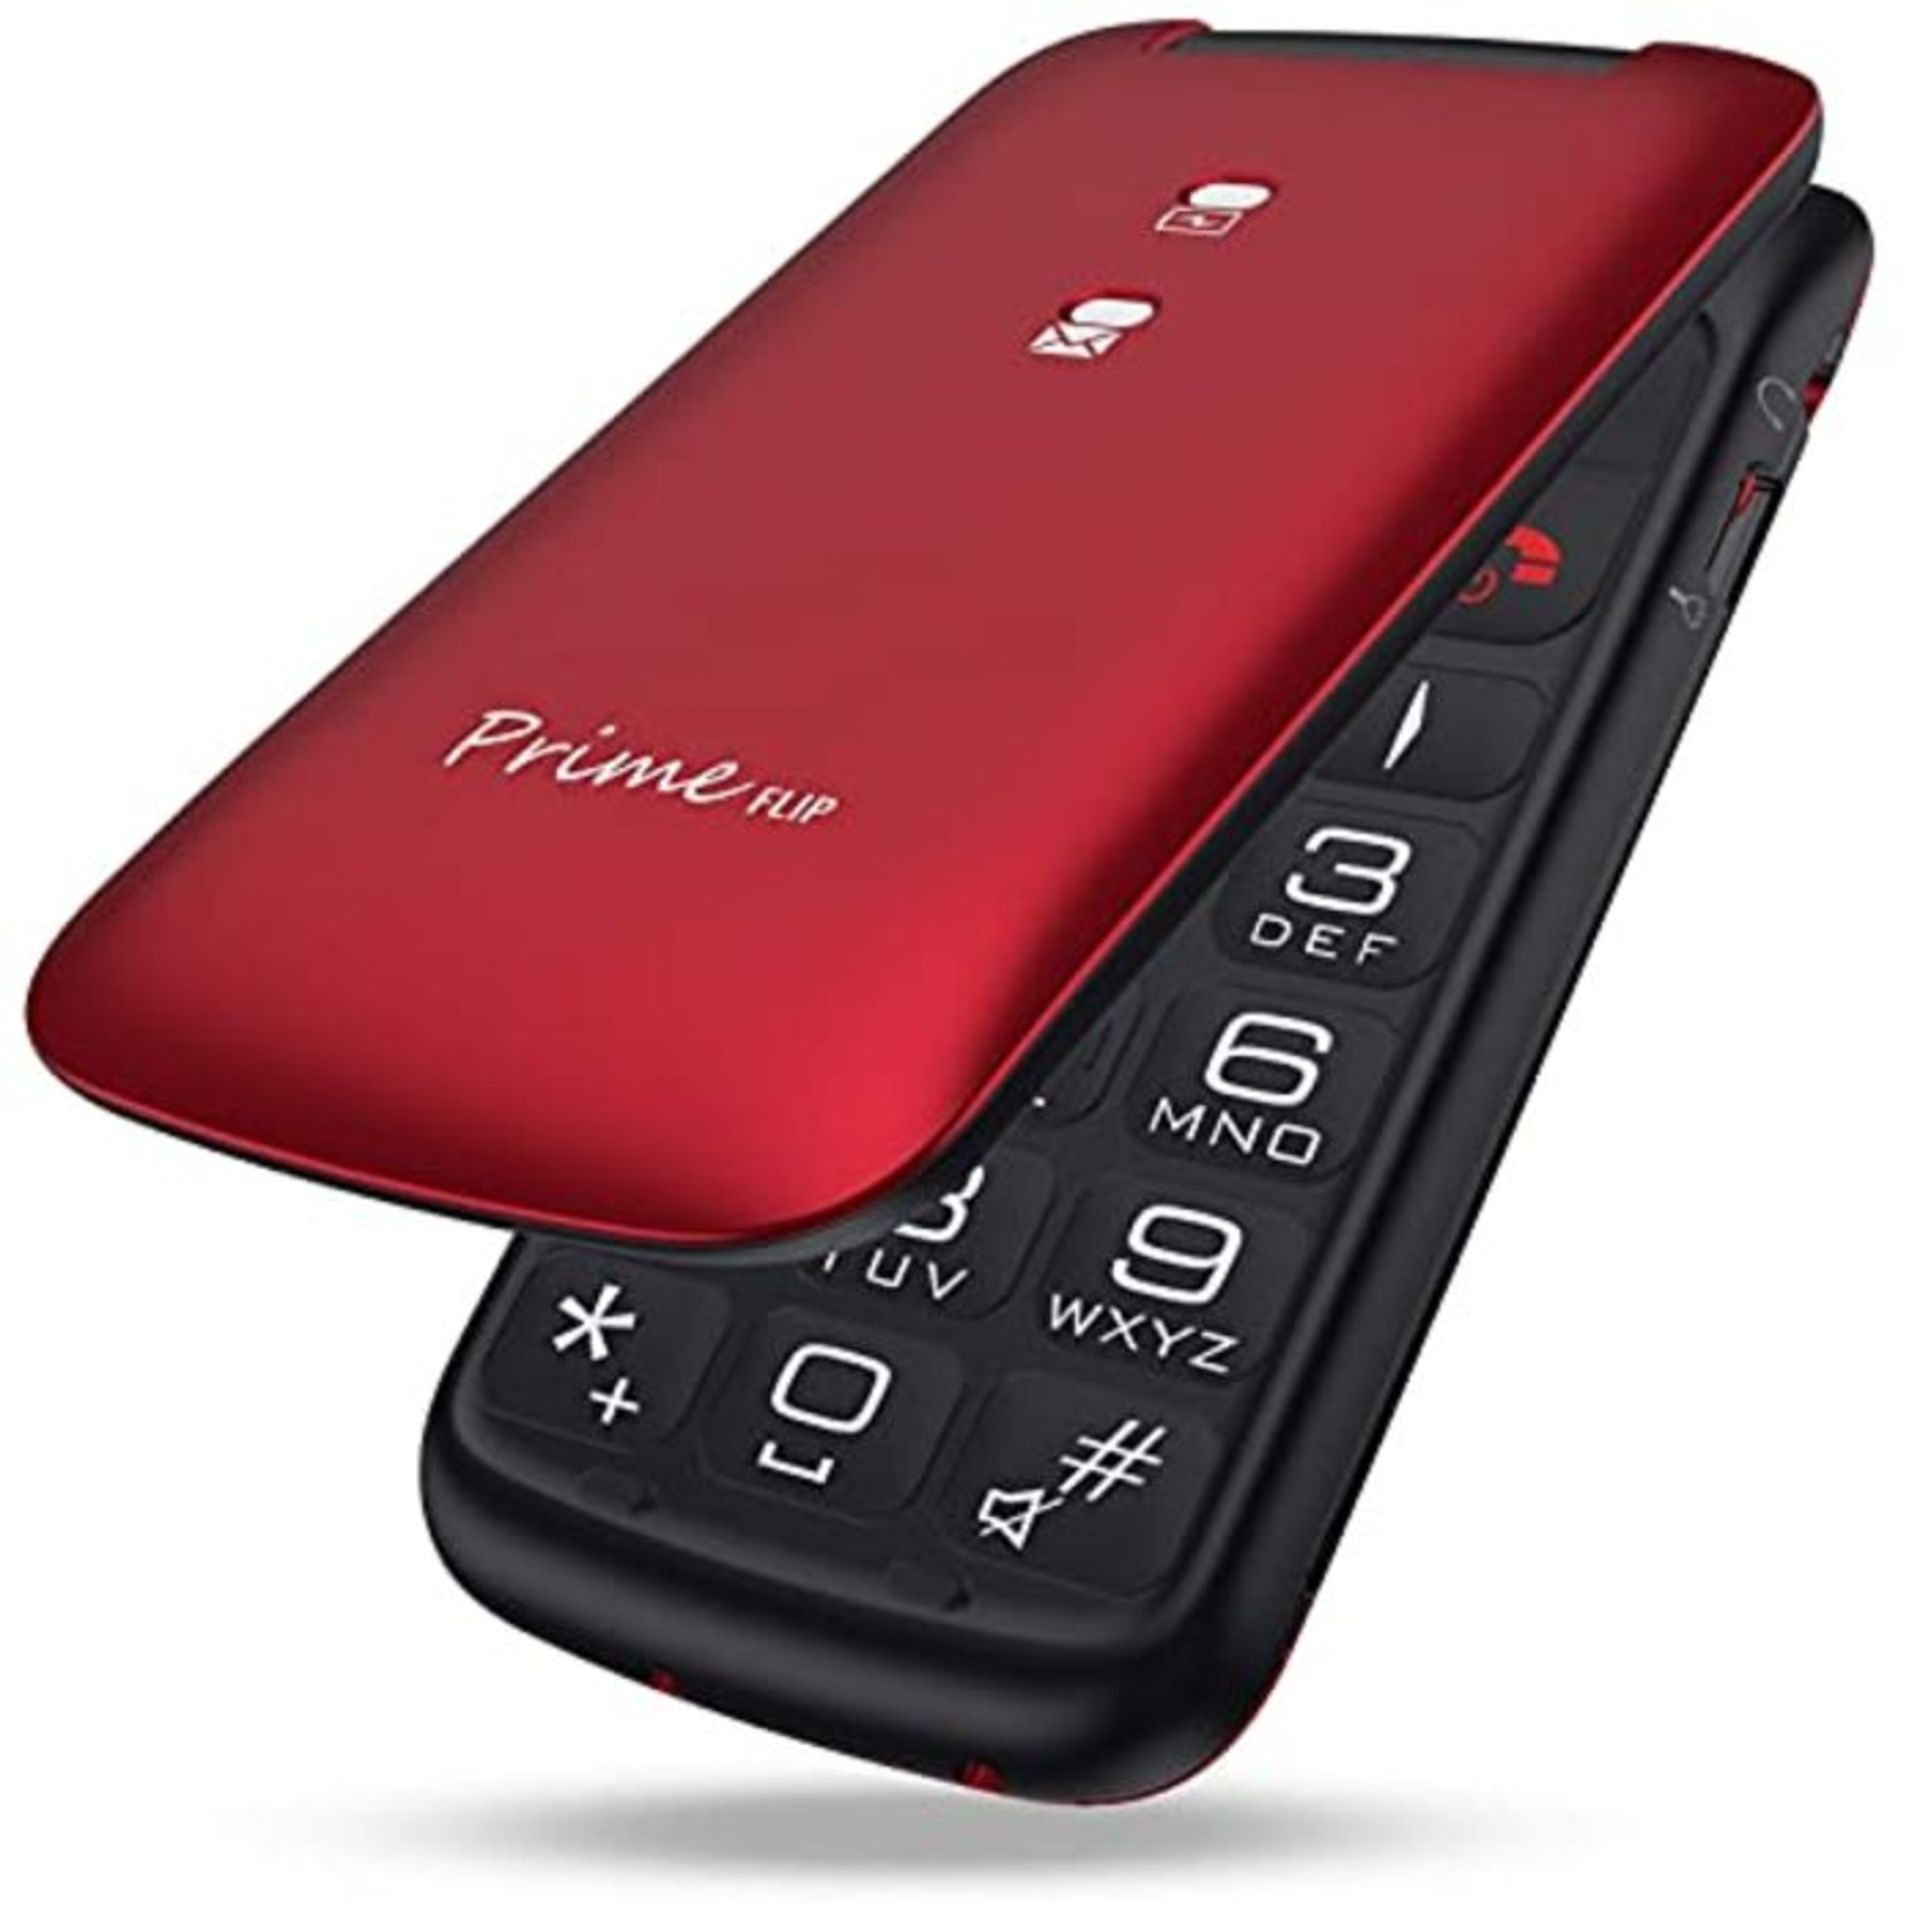 Easyfone Prime-Flip Big Button Senior Flip Mobile Phone, Easy-to-Use Clamshell Mobile